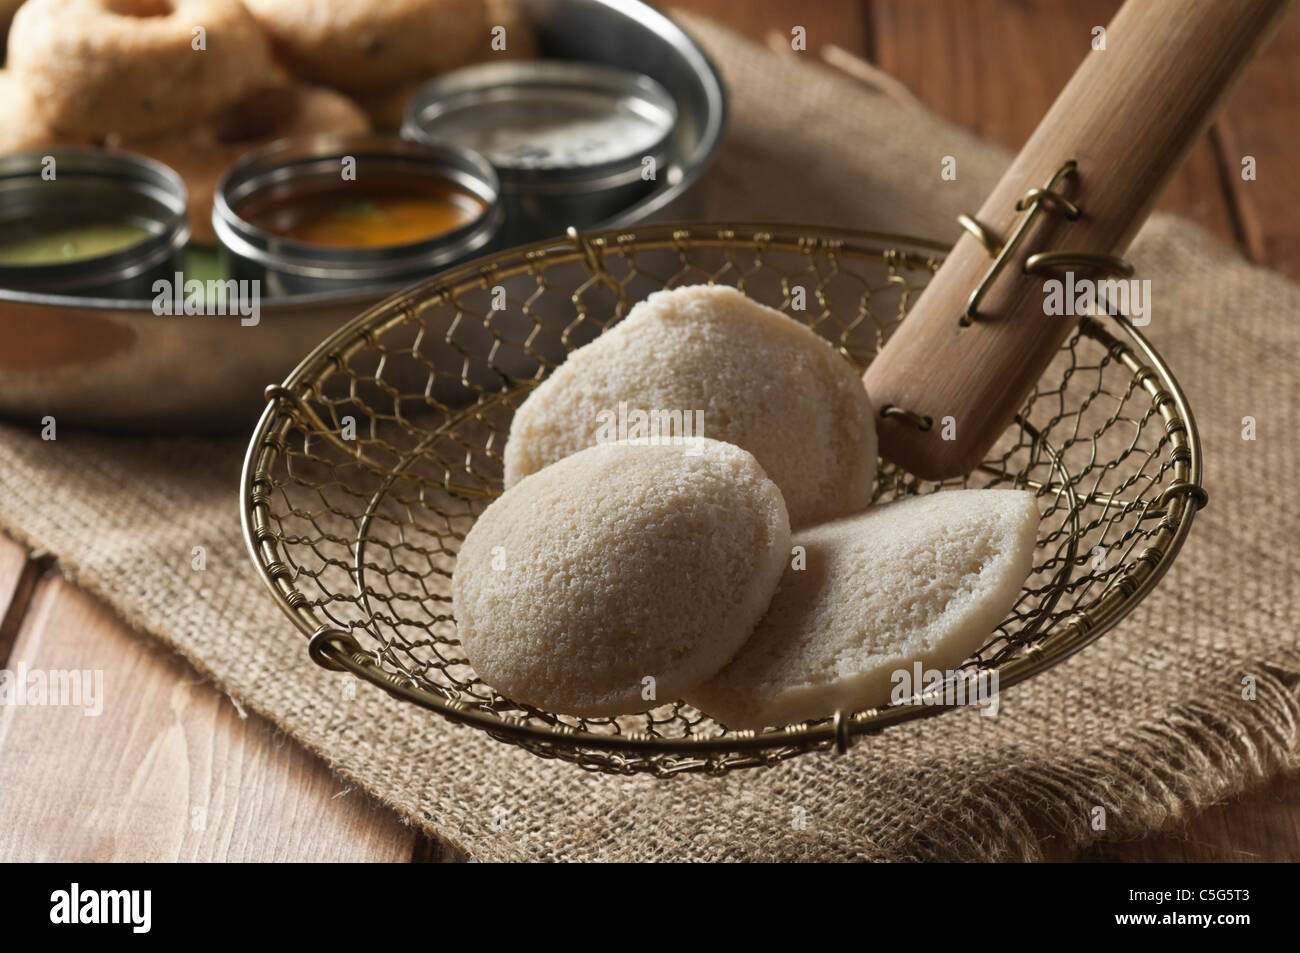 Idly. Steamed rice cakes. South Indian breakfast snack Stock Photo